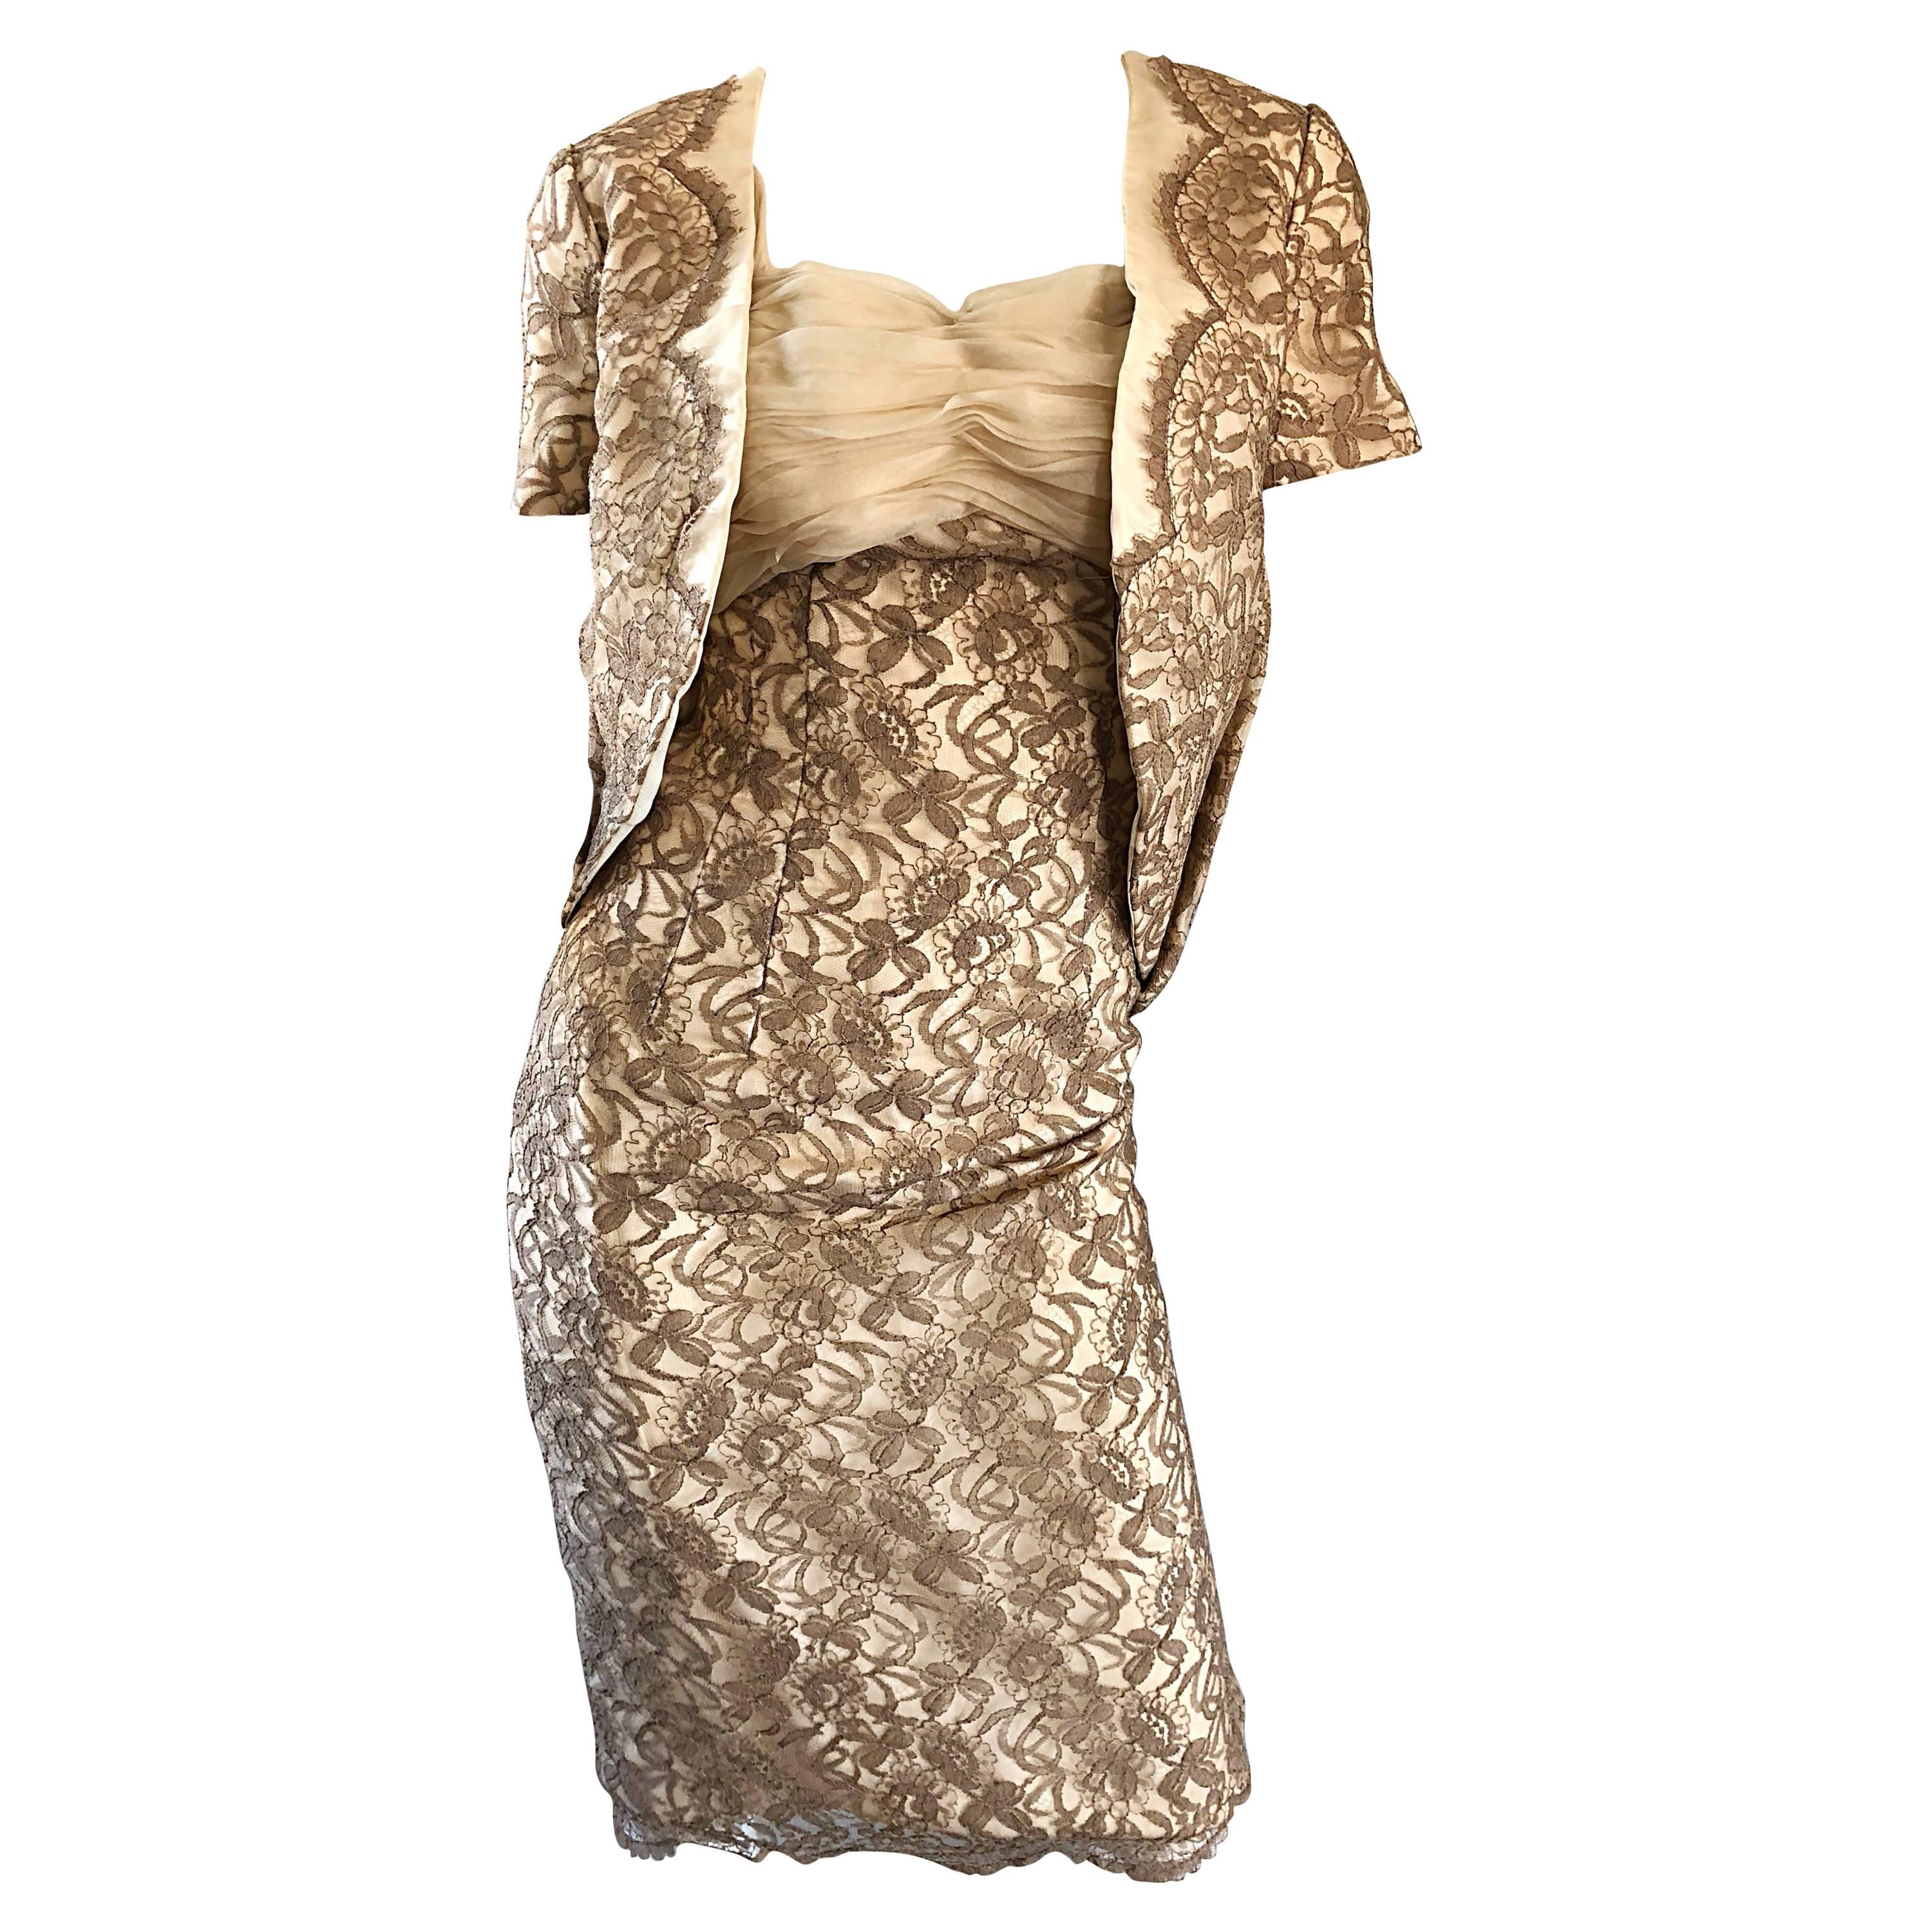 Sensational 1950s Demi Couture Nude Taupe Tan French Lace 50s Dress + Bolero For Sale